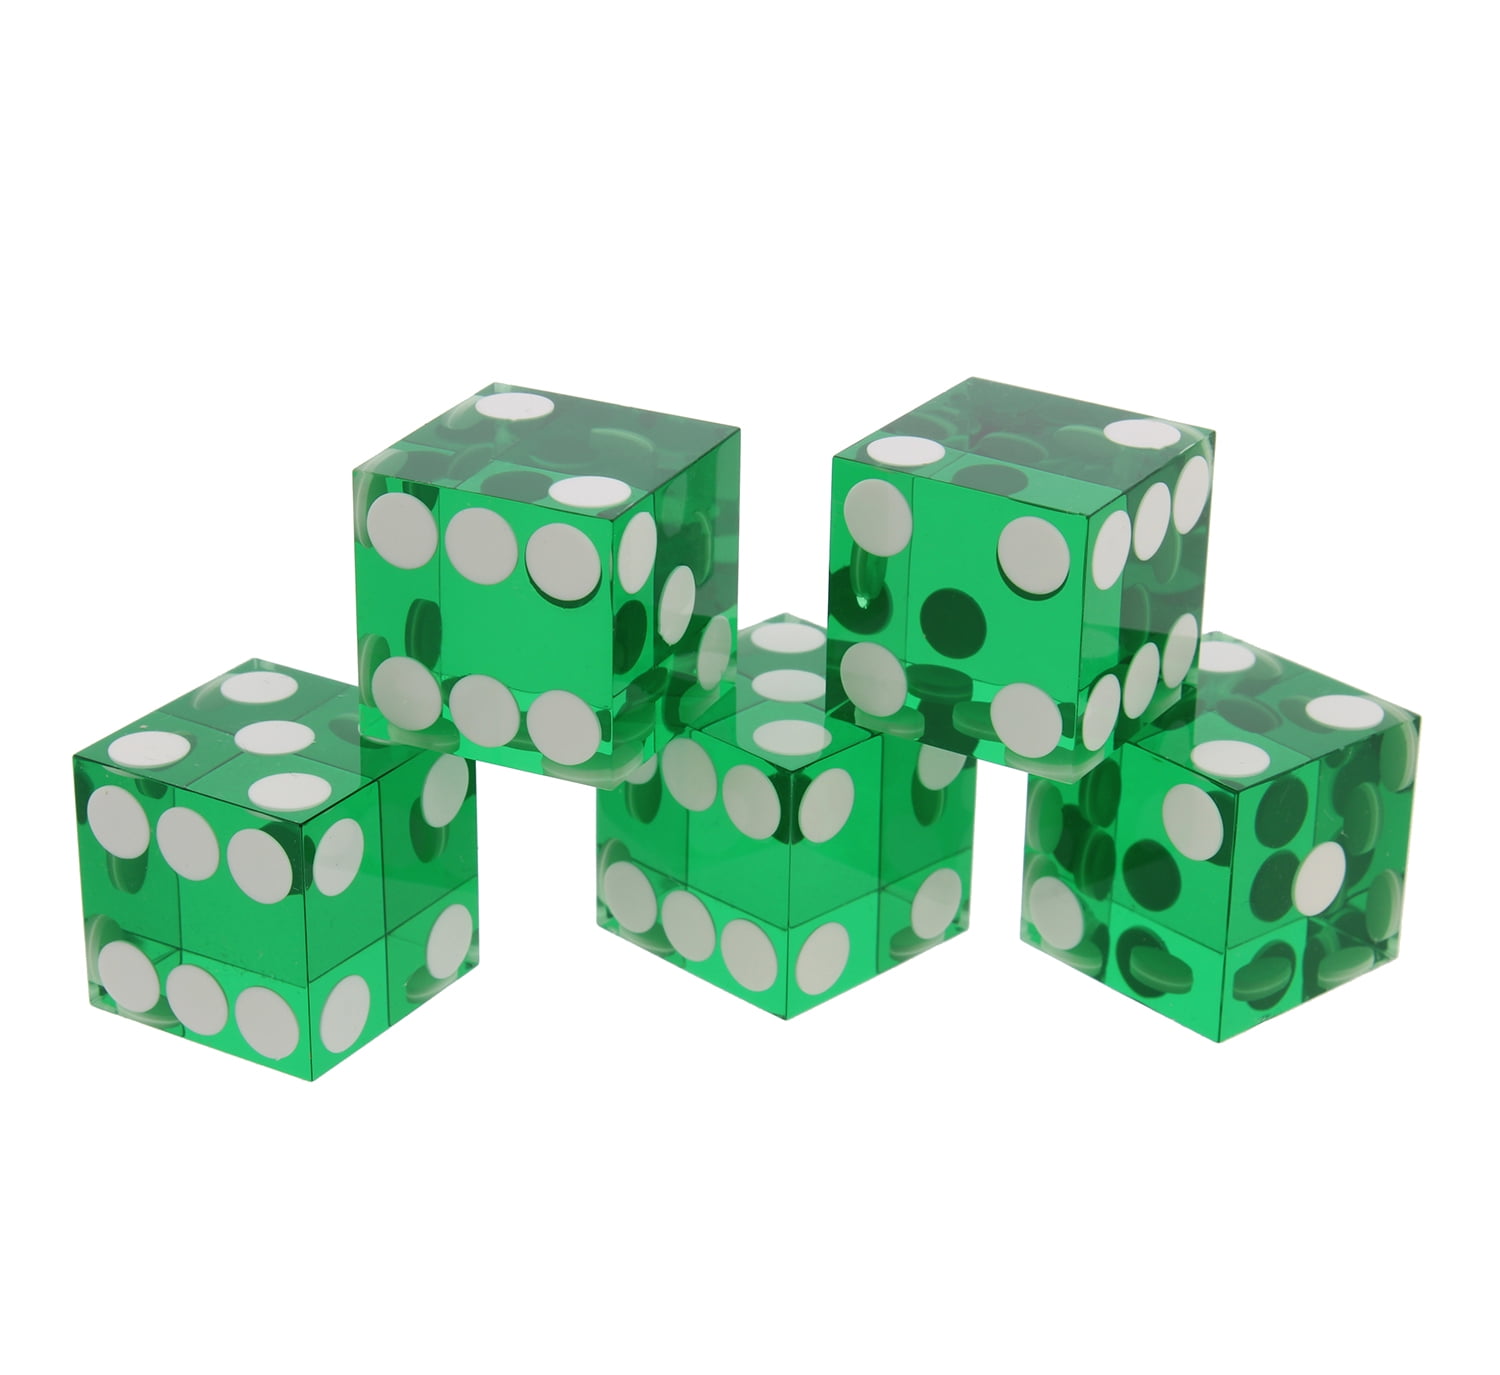 Green 19mm D6 Six-Sided Gaming Transparent Casino Dice Set of 5 